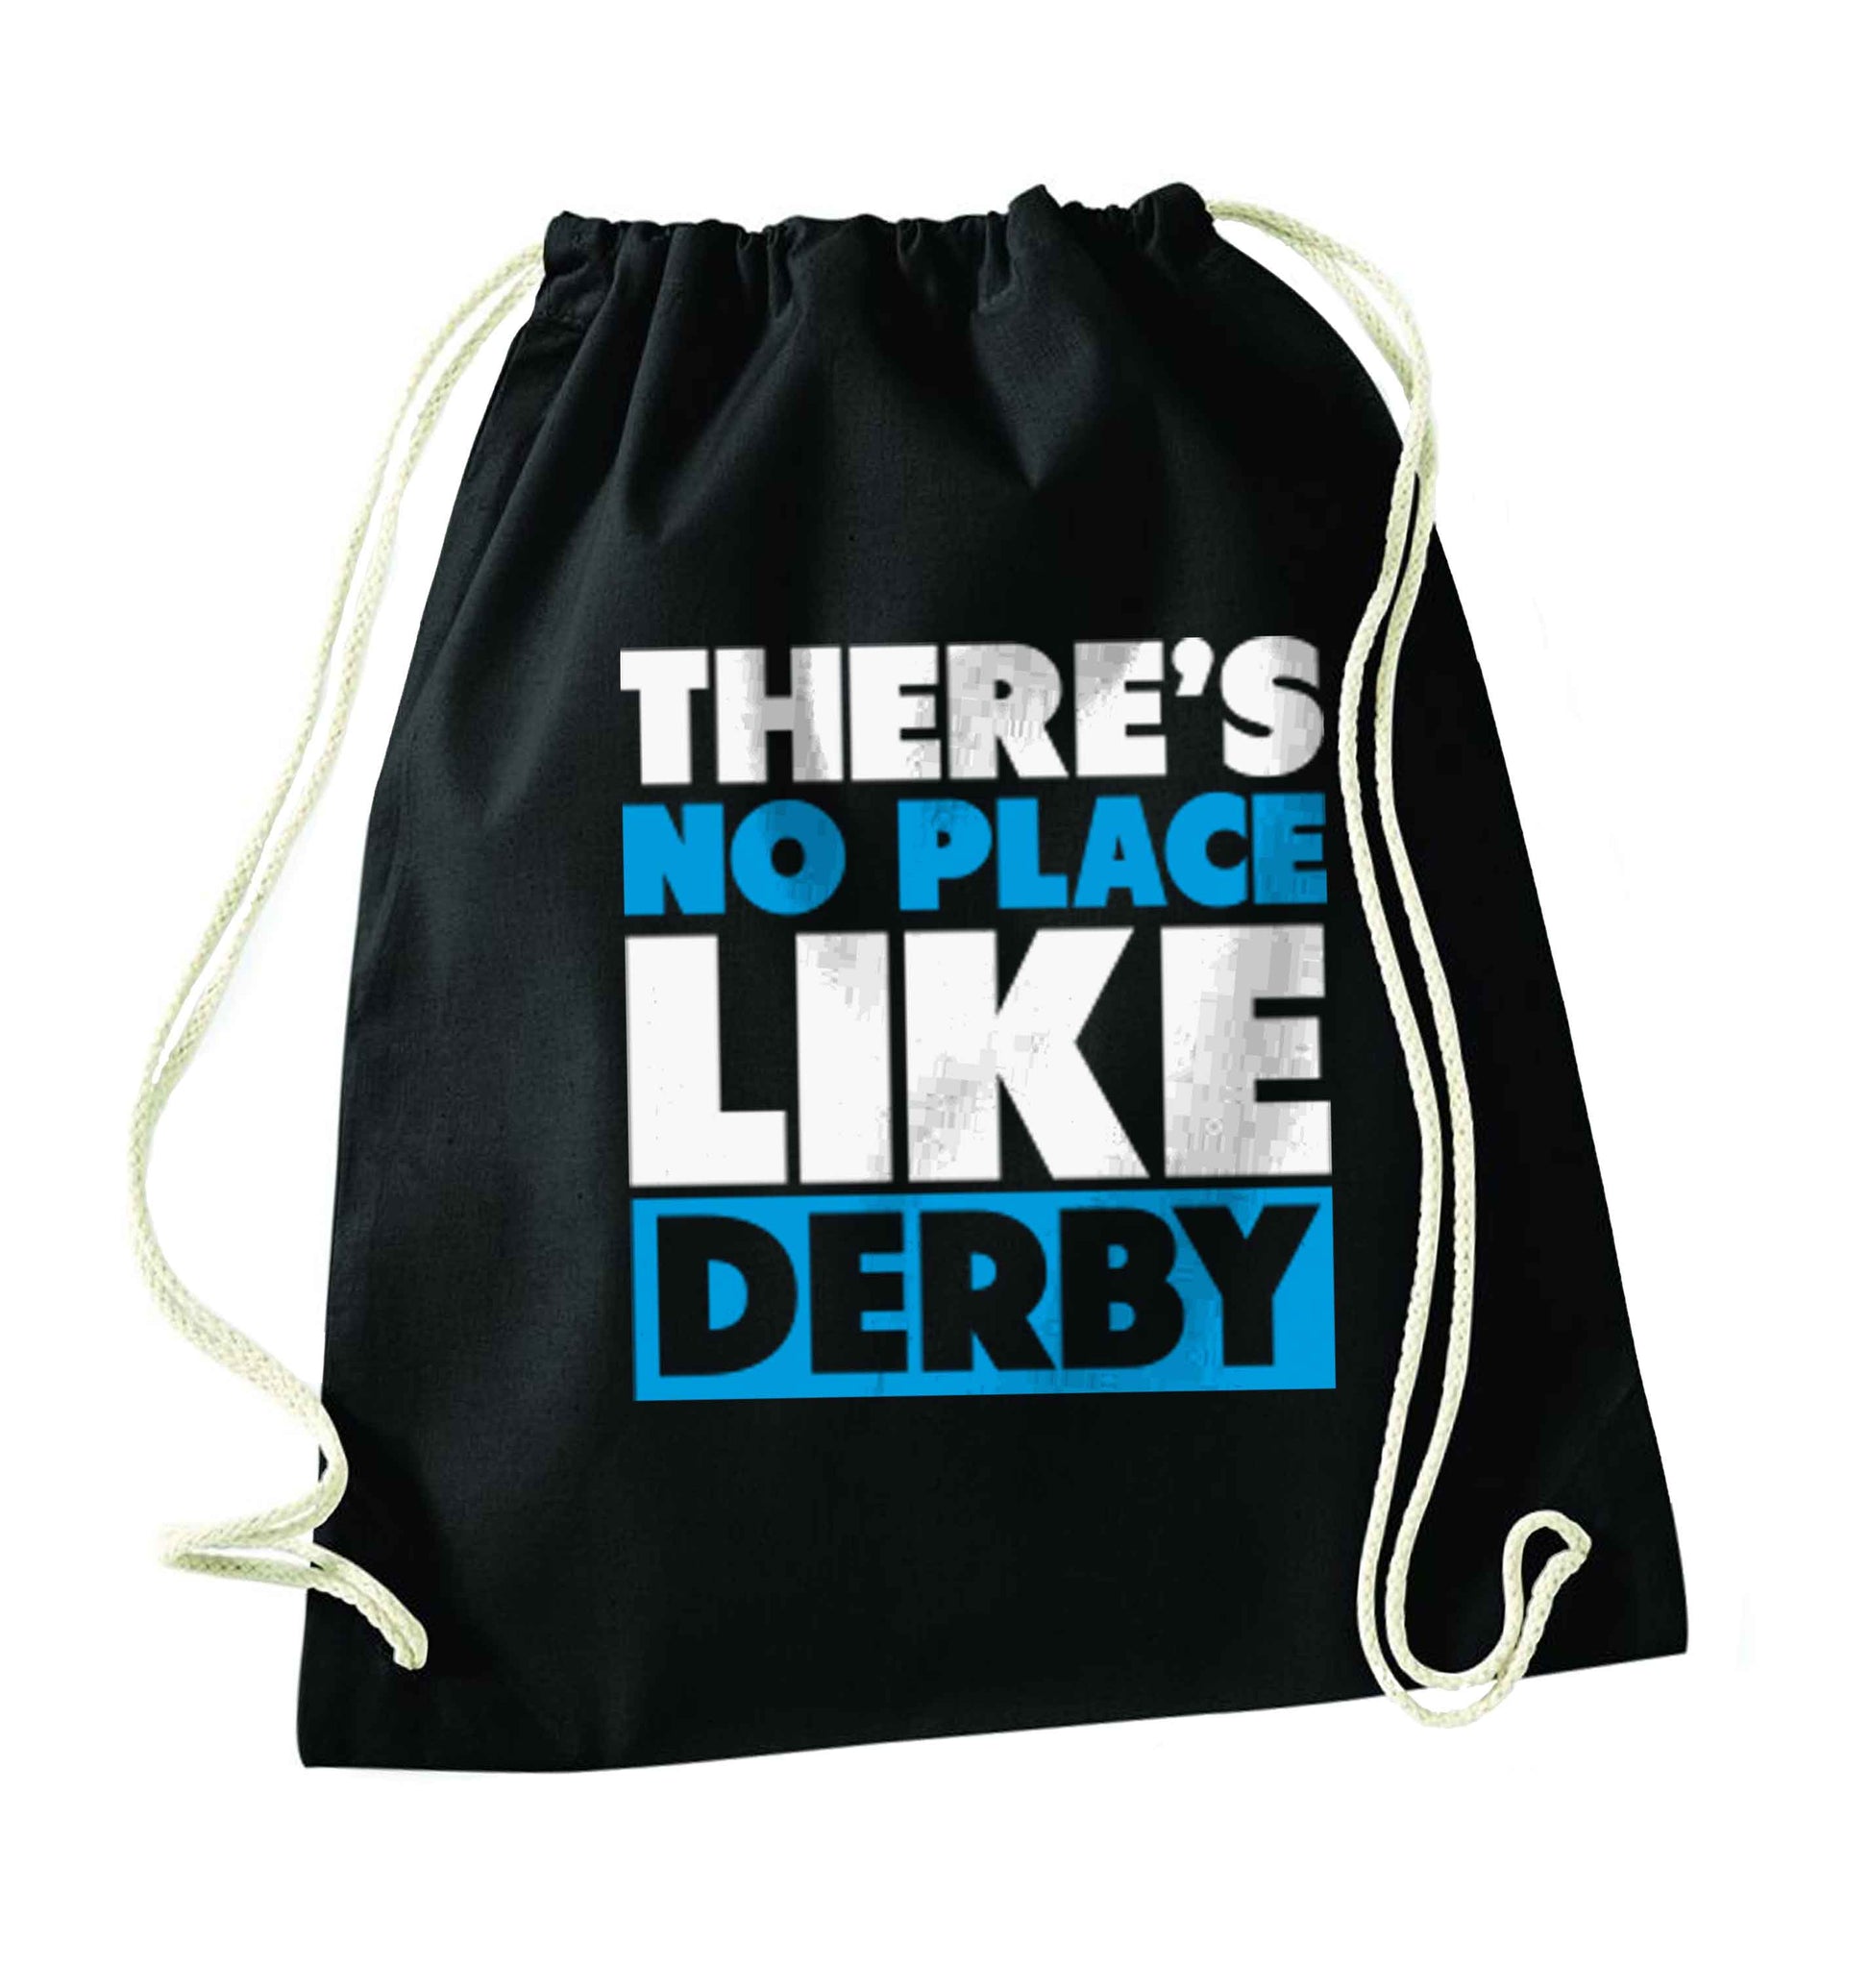 There's no place like Derby black drawstring bag